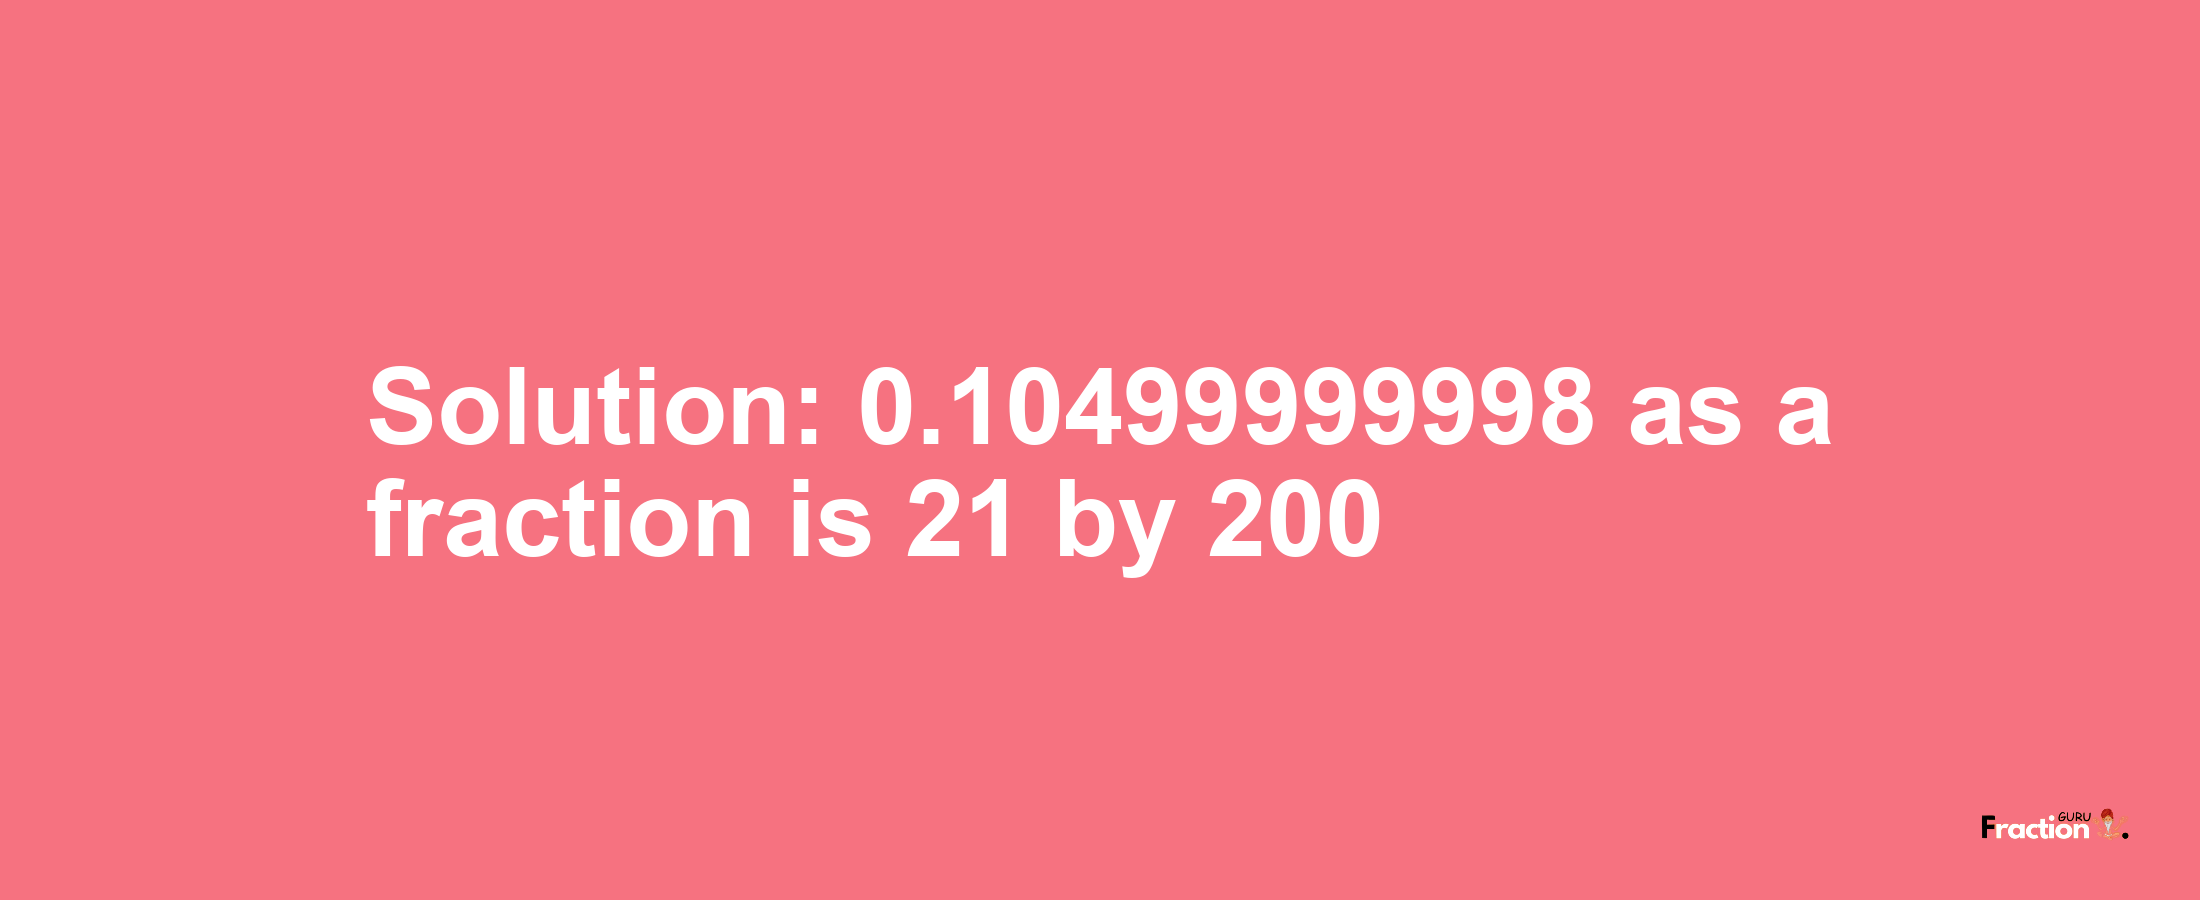 Solution:0.10499999998 as a fraction is 21/200